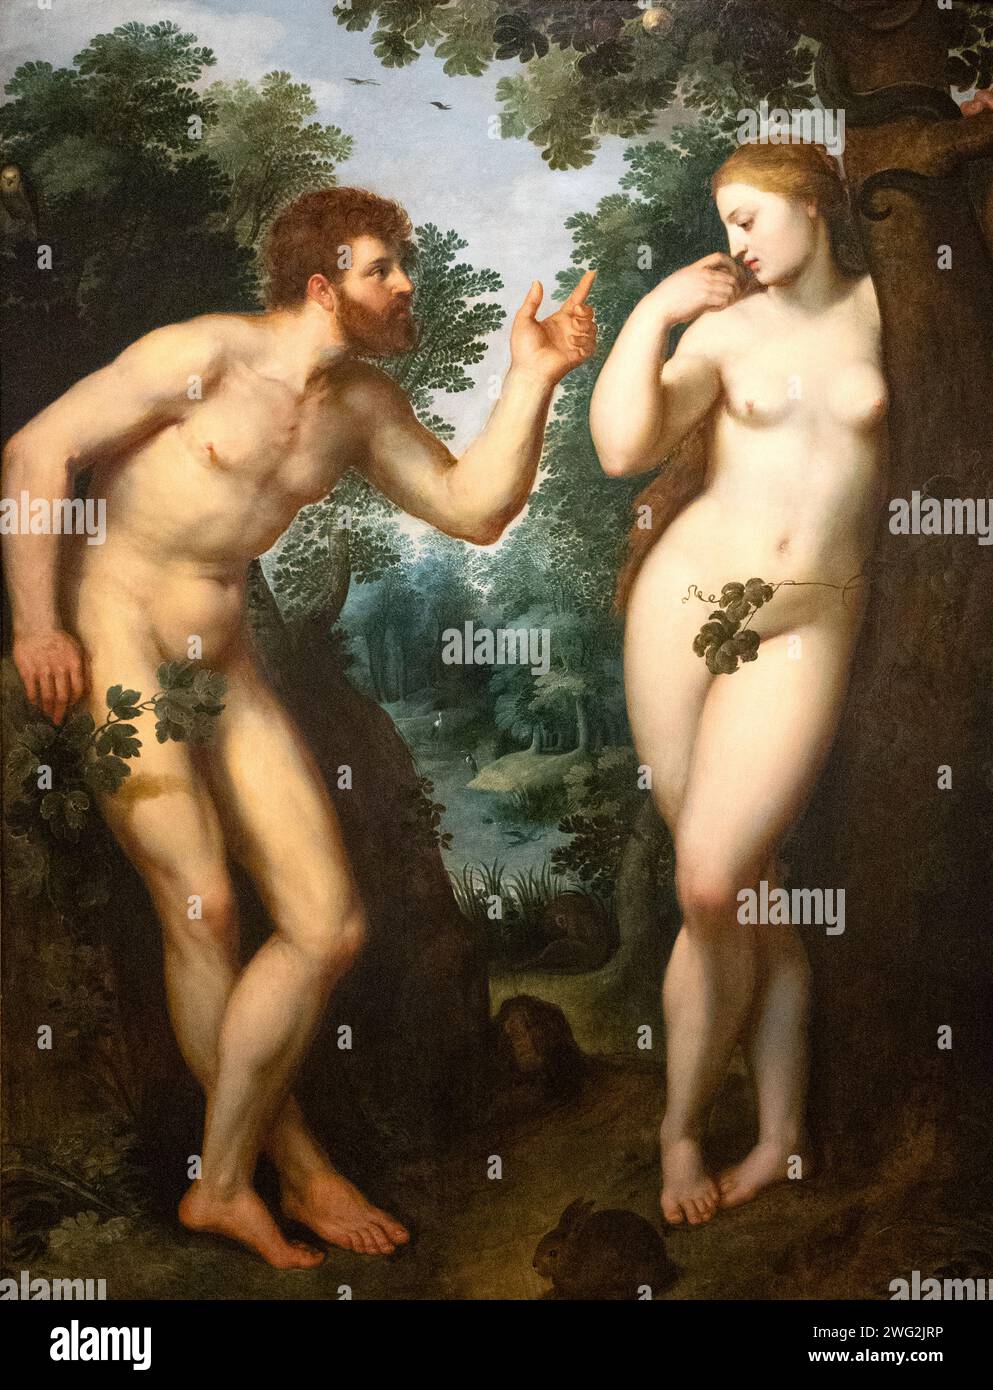 Peter Paul Rubens painting, 'Adam and Eve', c 1599, oil on panel. The earliest surviving nudes by Rubens, 16th century mythology or history painting. Stock Photo